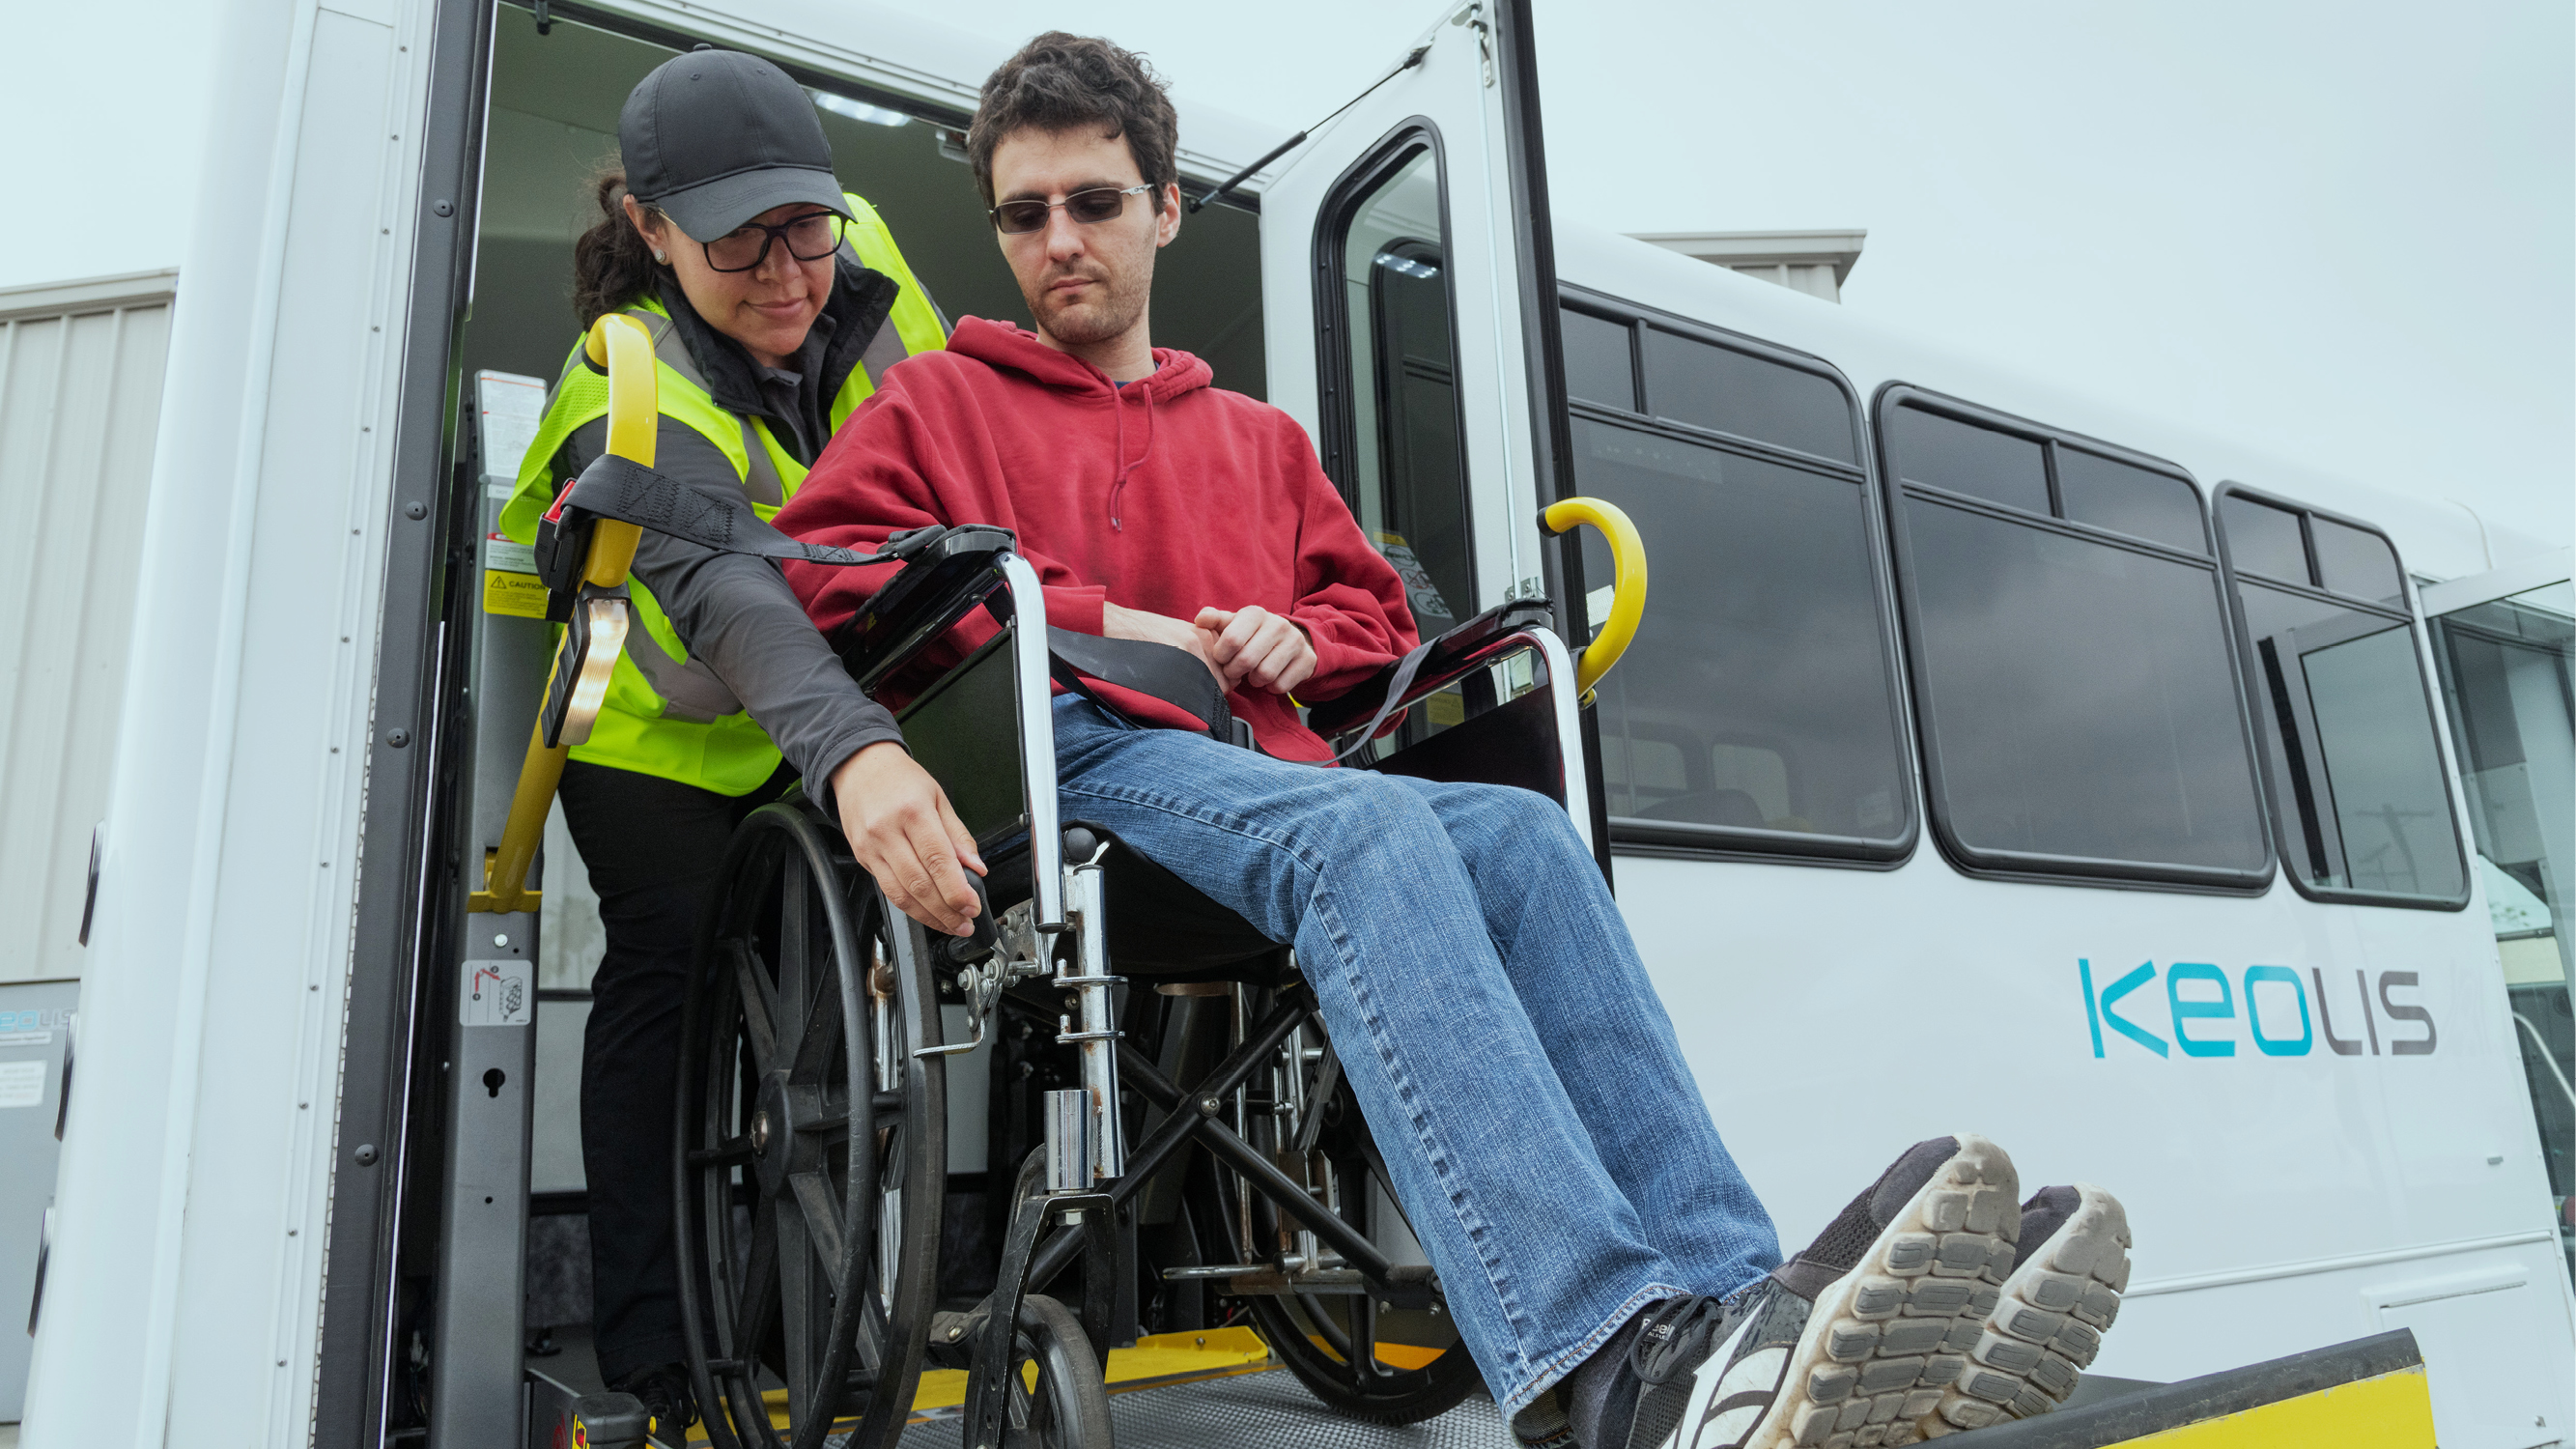 staff help a person with reduced mobility